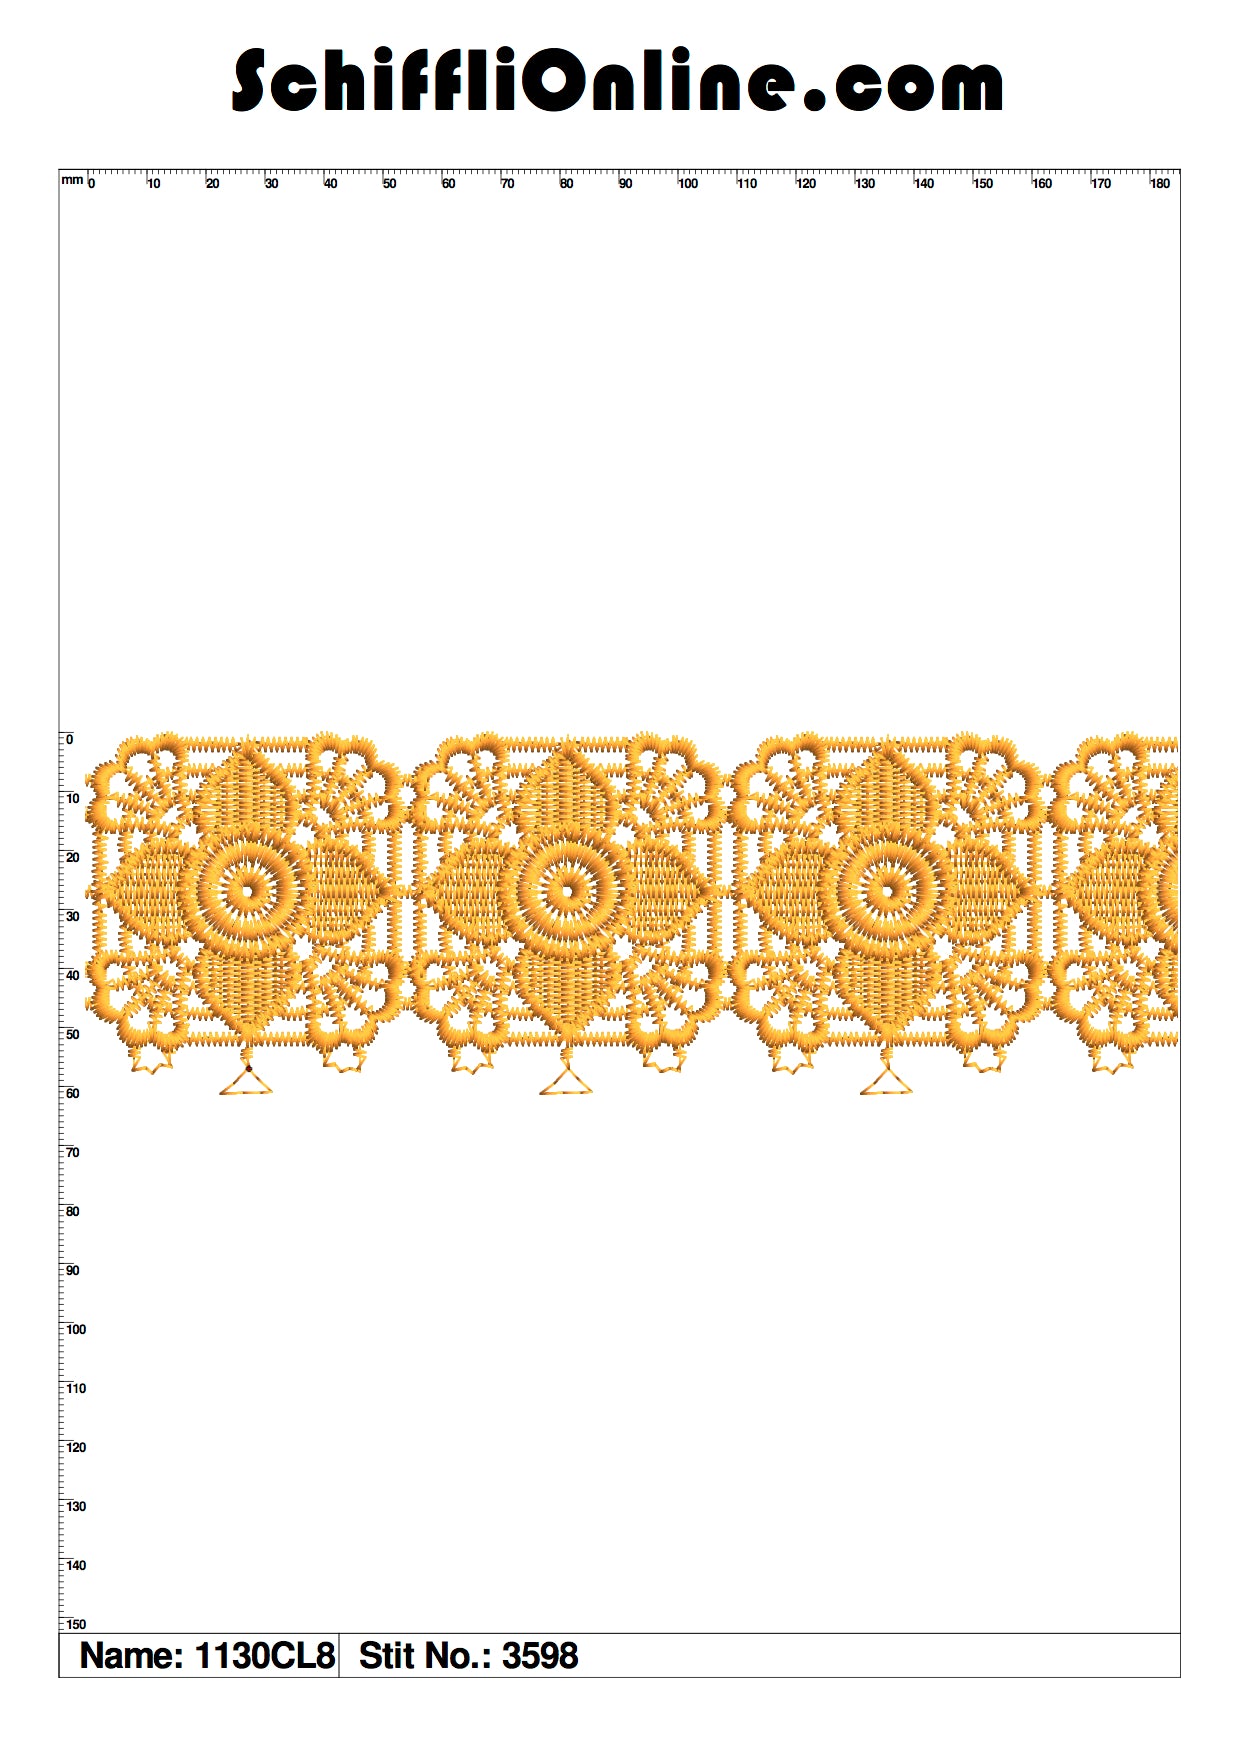 Book 139 CHEMICAL LACE 8X4 50 DESIGNS